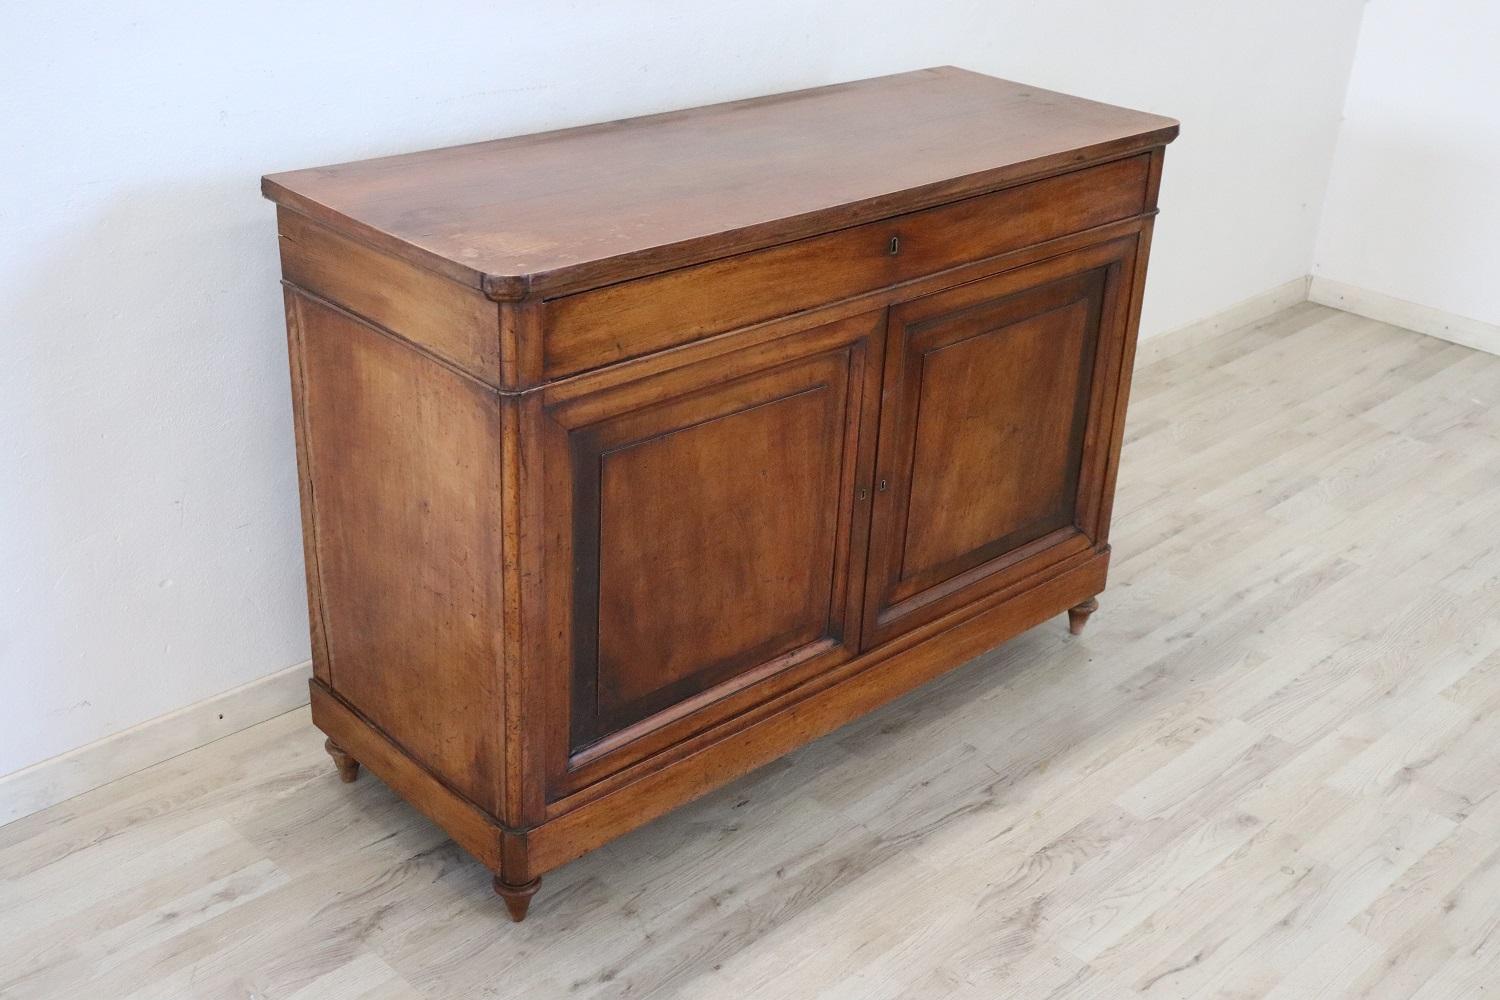 Beautiful sideboard in solid walnut wood made in 1850s. The line is simple and essential, perfect to be placed also in a modern environment. Beautiful patina of walnut wood. Ample useful internal space equipped with one comfortable long drawer. The